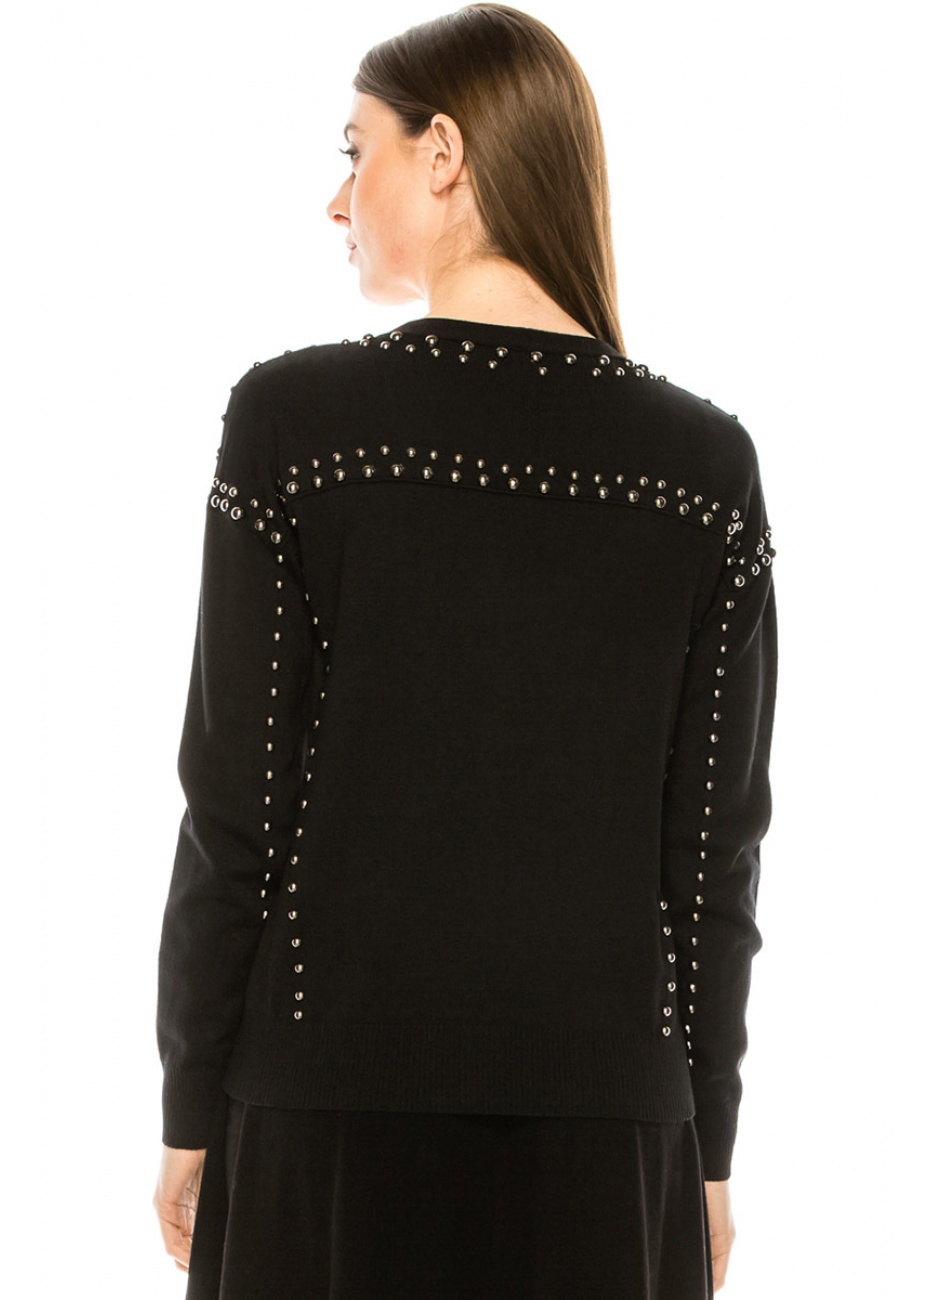 Classic V-neck cardigan with pearls